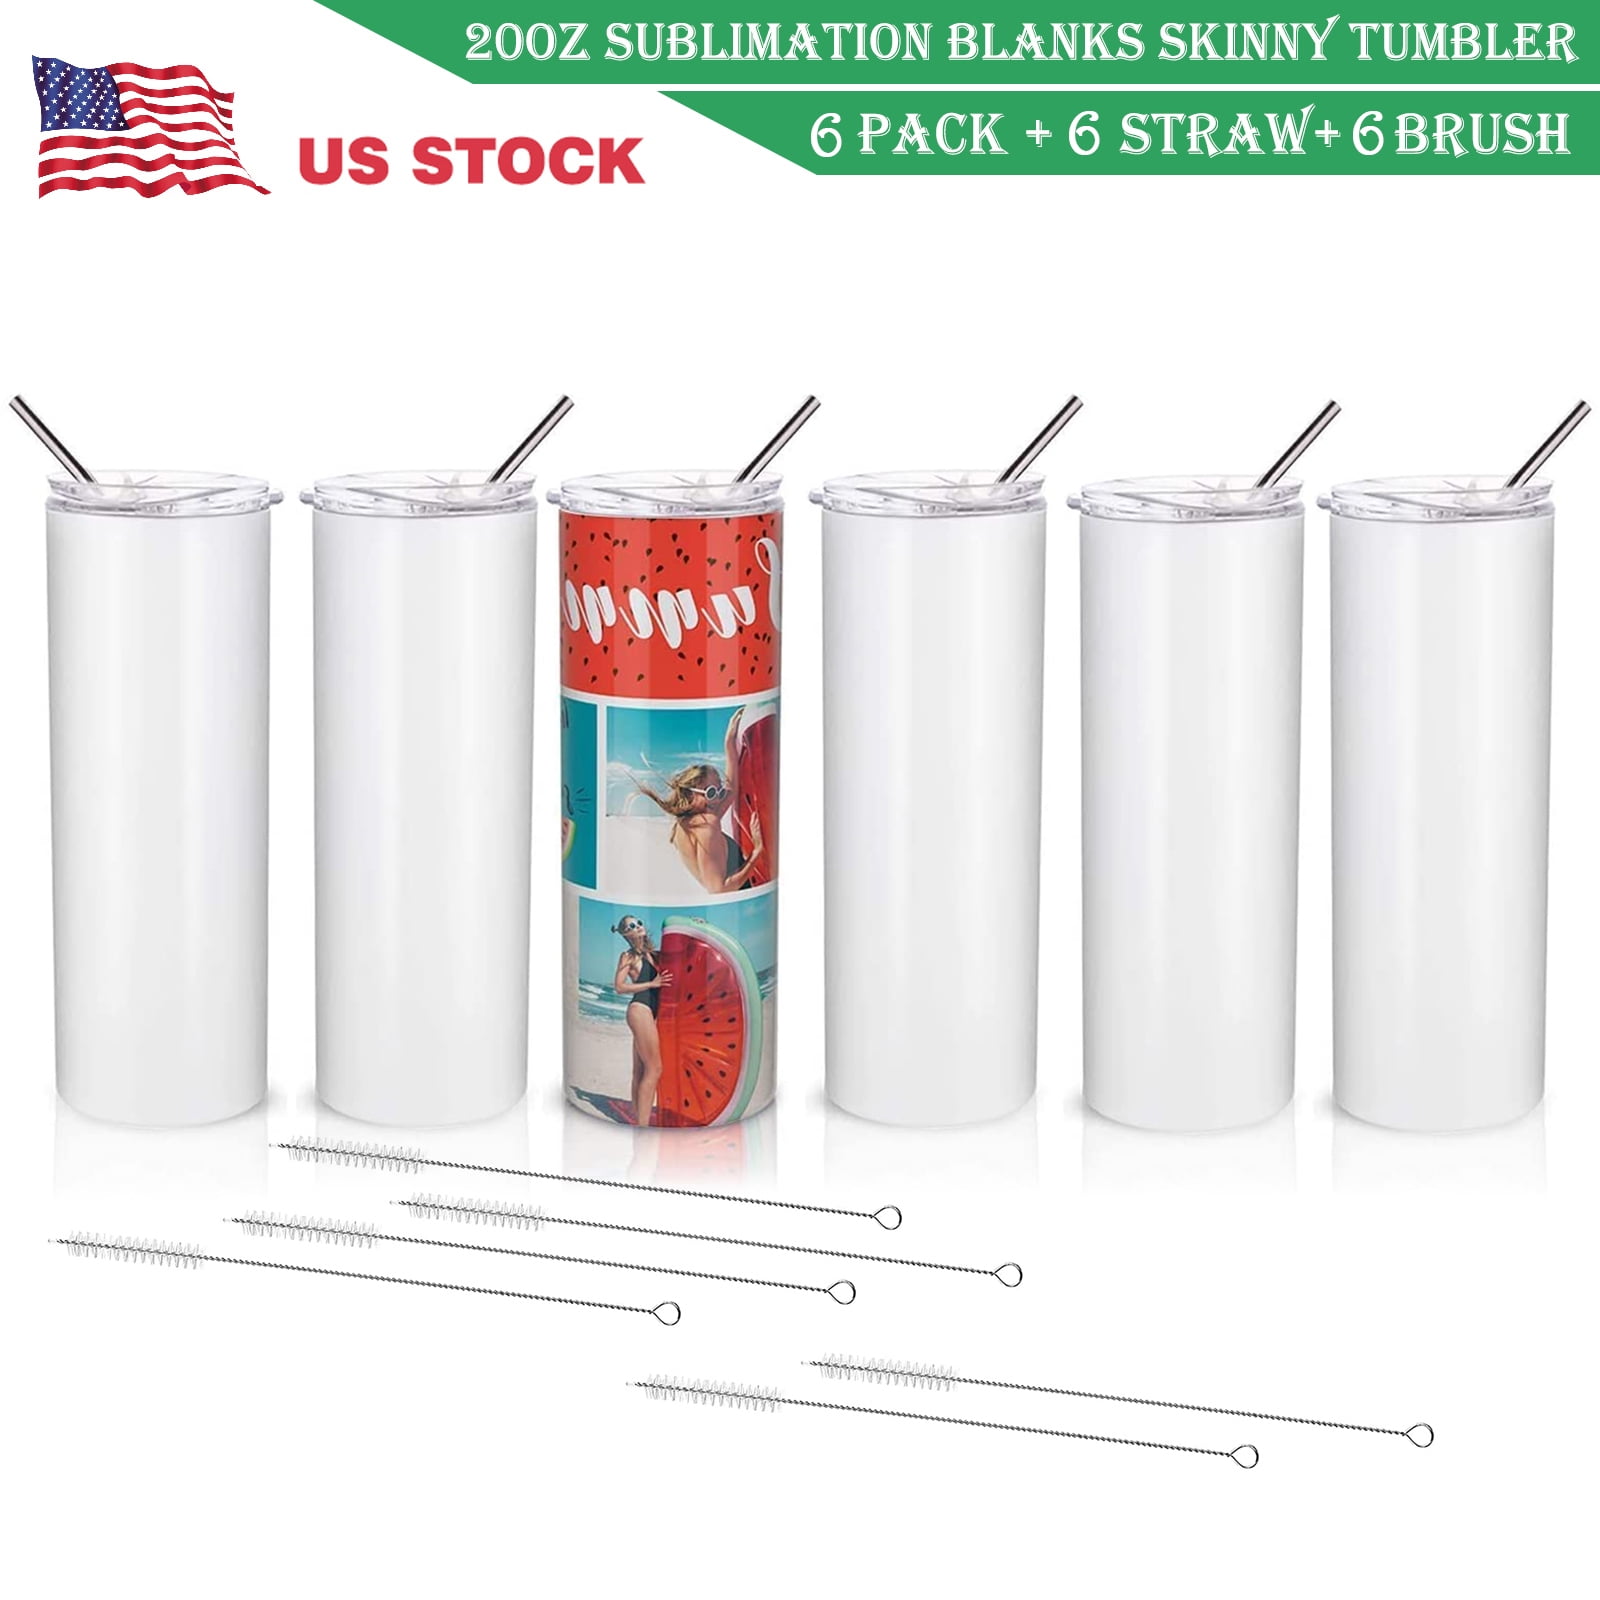 6 Pack 15oz STRAIGHT Sublimation Tumblers USA SELLER 